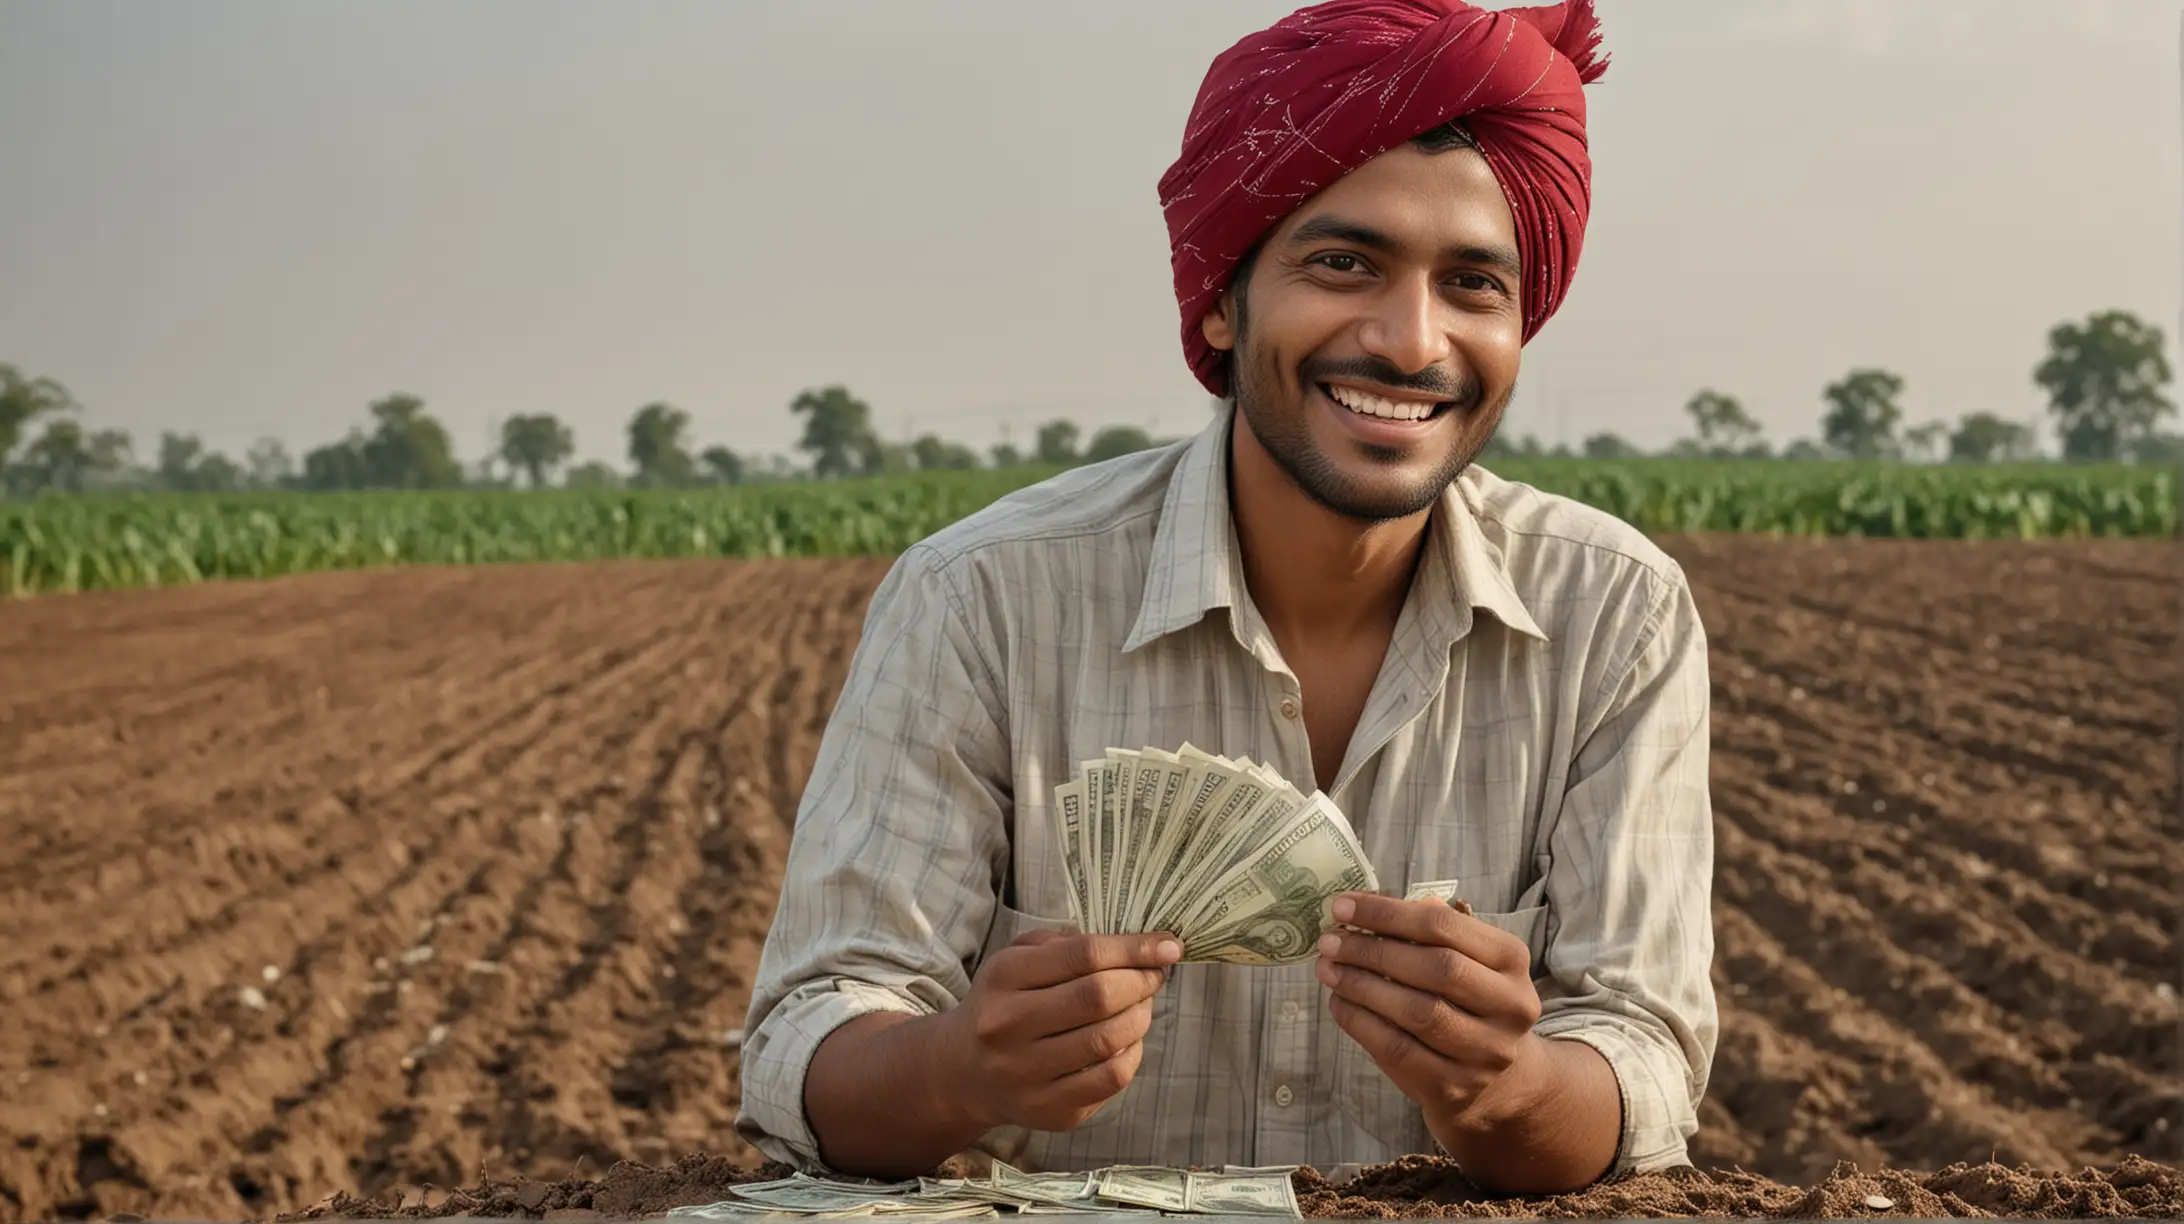 Indian Farmer Counting Money with Joy on Farm Land